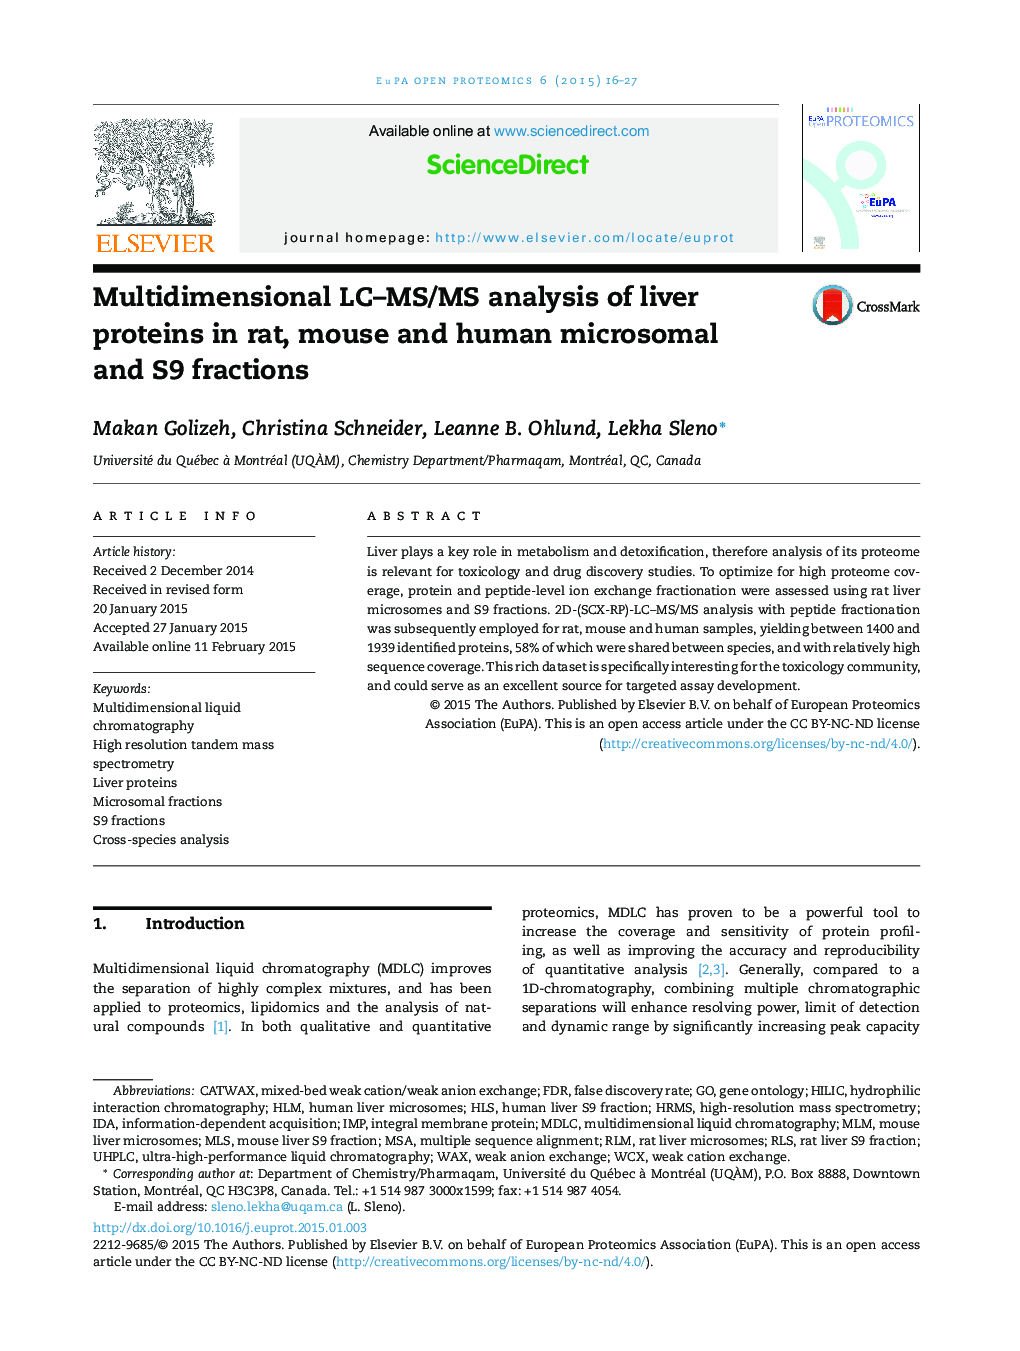 Multidimensional LC–MS/MS analysis of liver proteins in rat, mouse and human microsomal and S9 fractions 